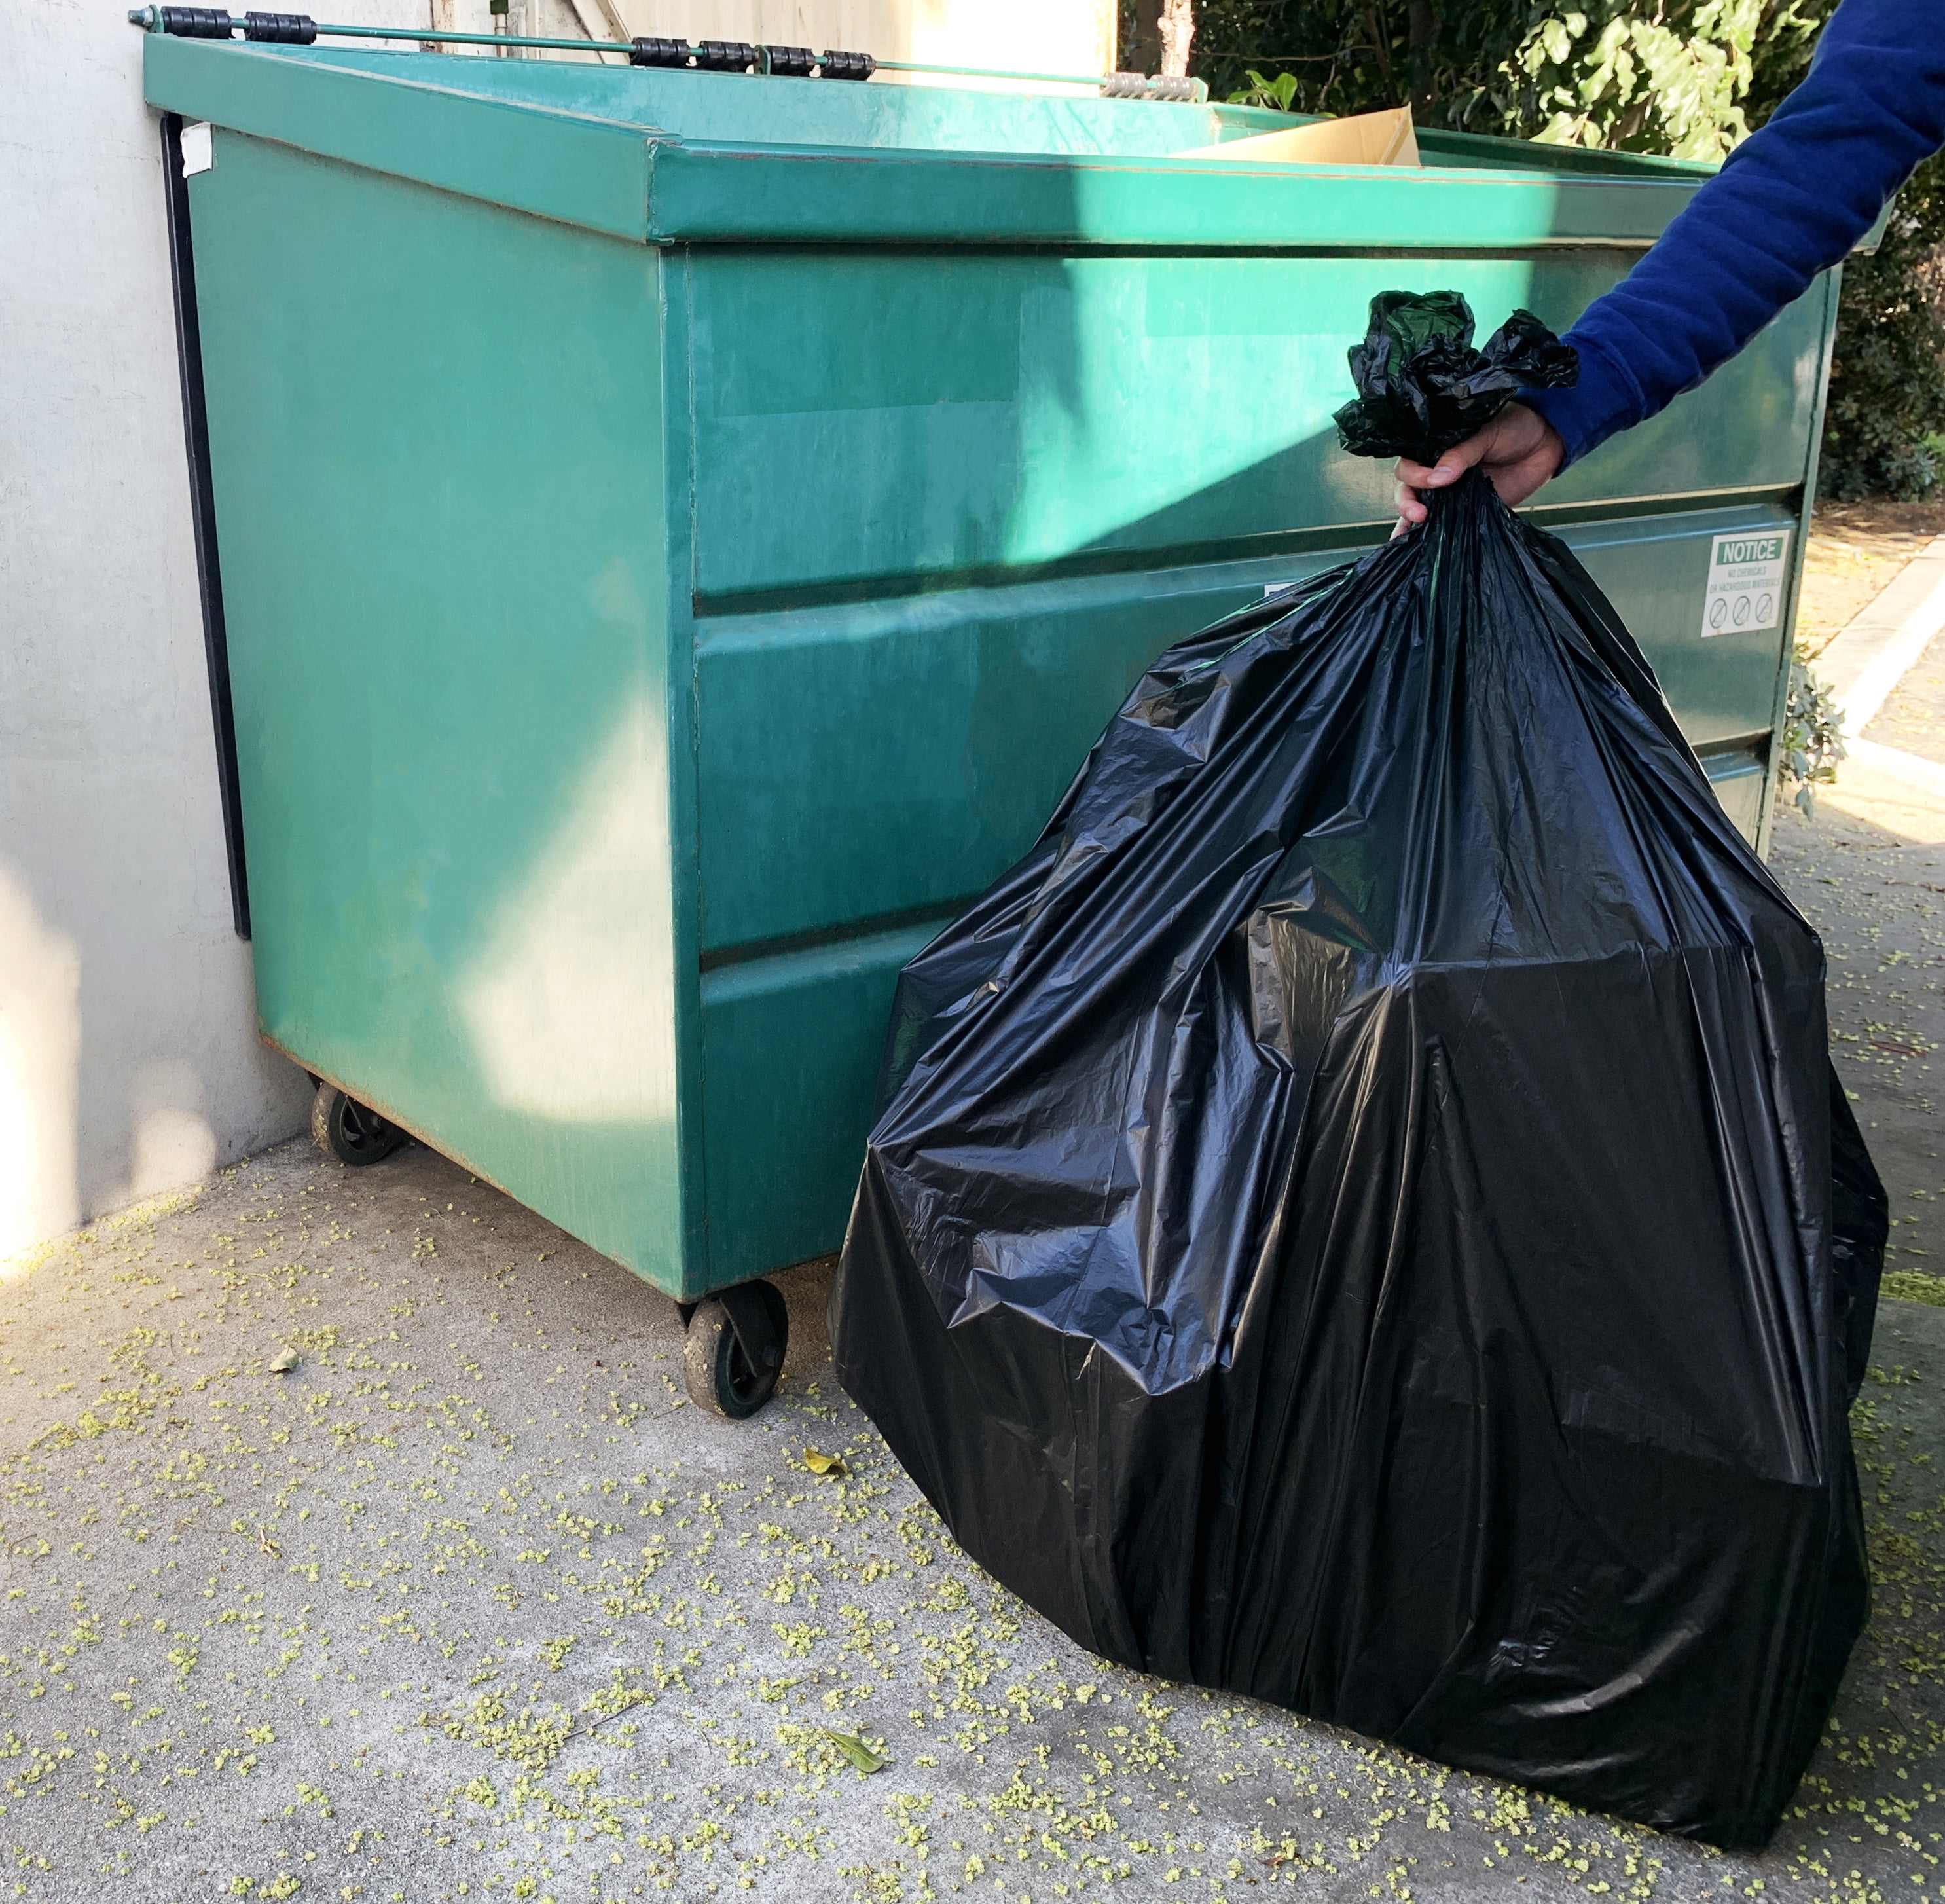 Heavy Duty Black Trash Bags – 95 Gallon Garbage Can Liner for Garbage,  Storage, Yard Waste, Construction and Commercial Use - 1.5 Mil Thick 61 x  68